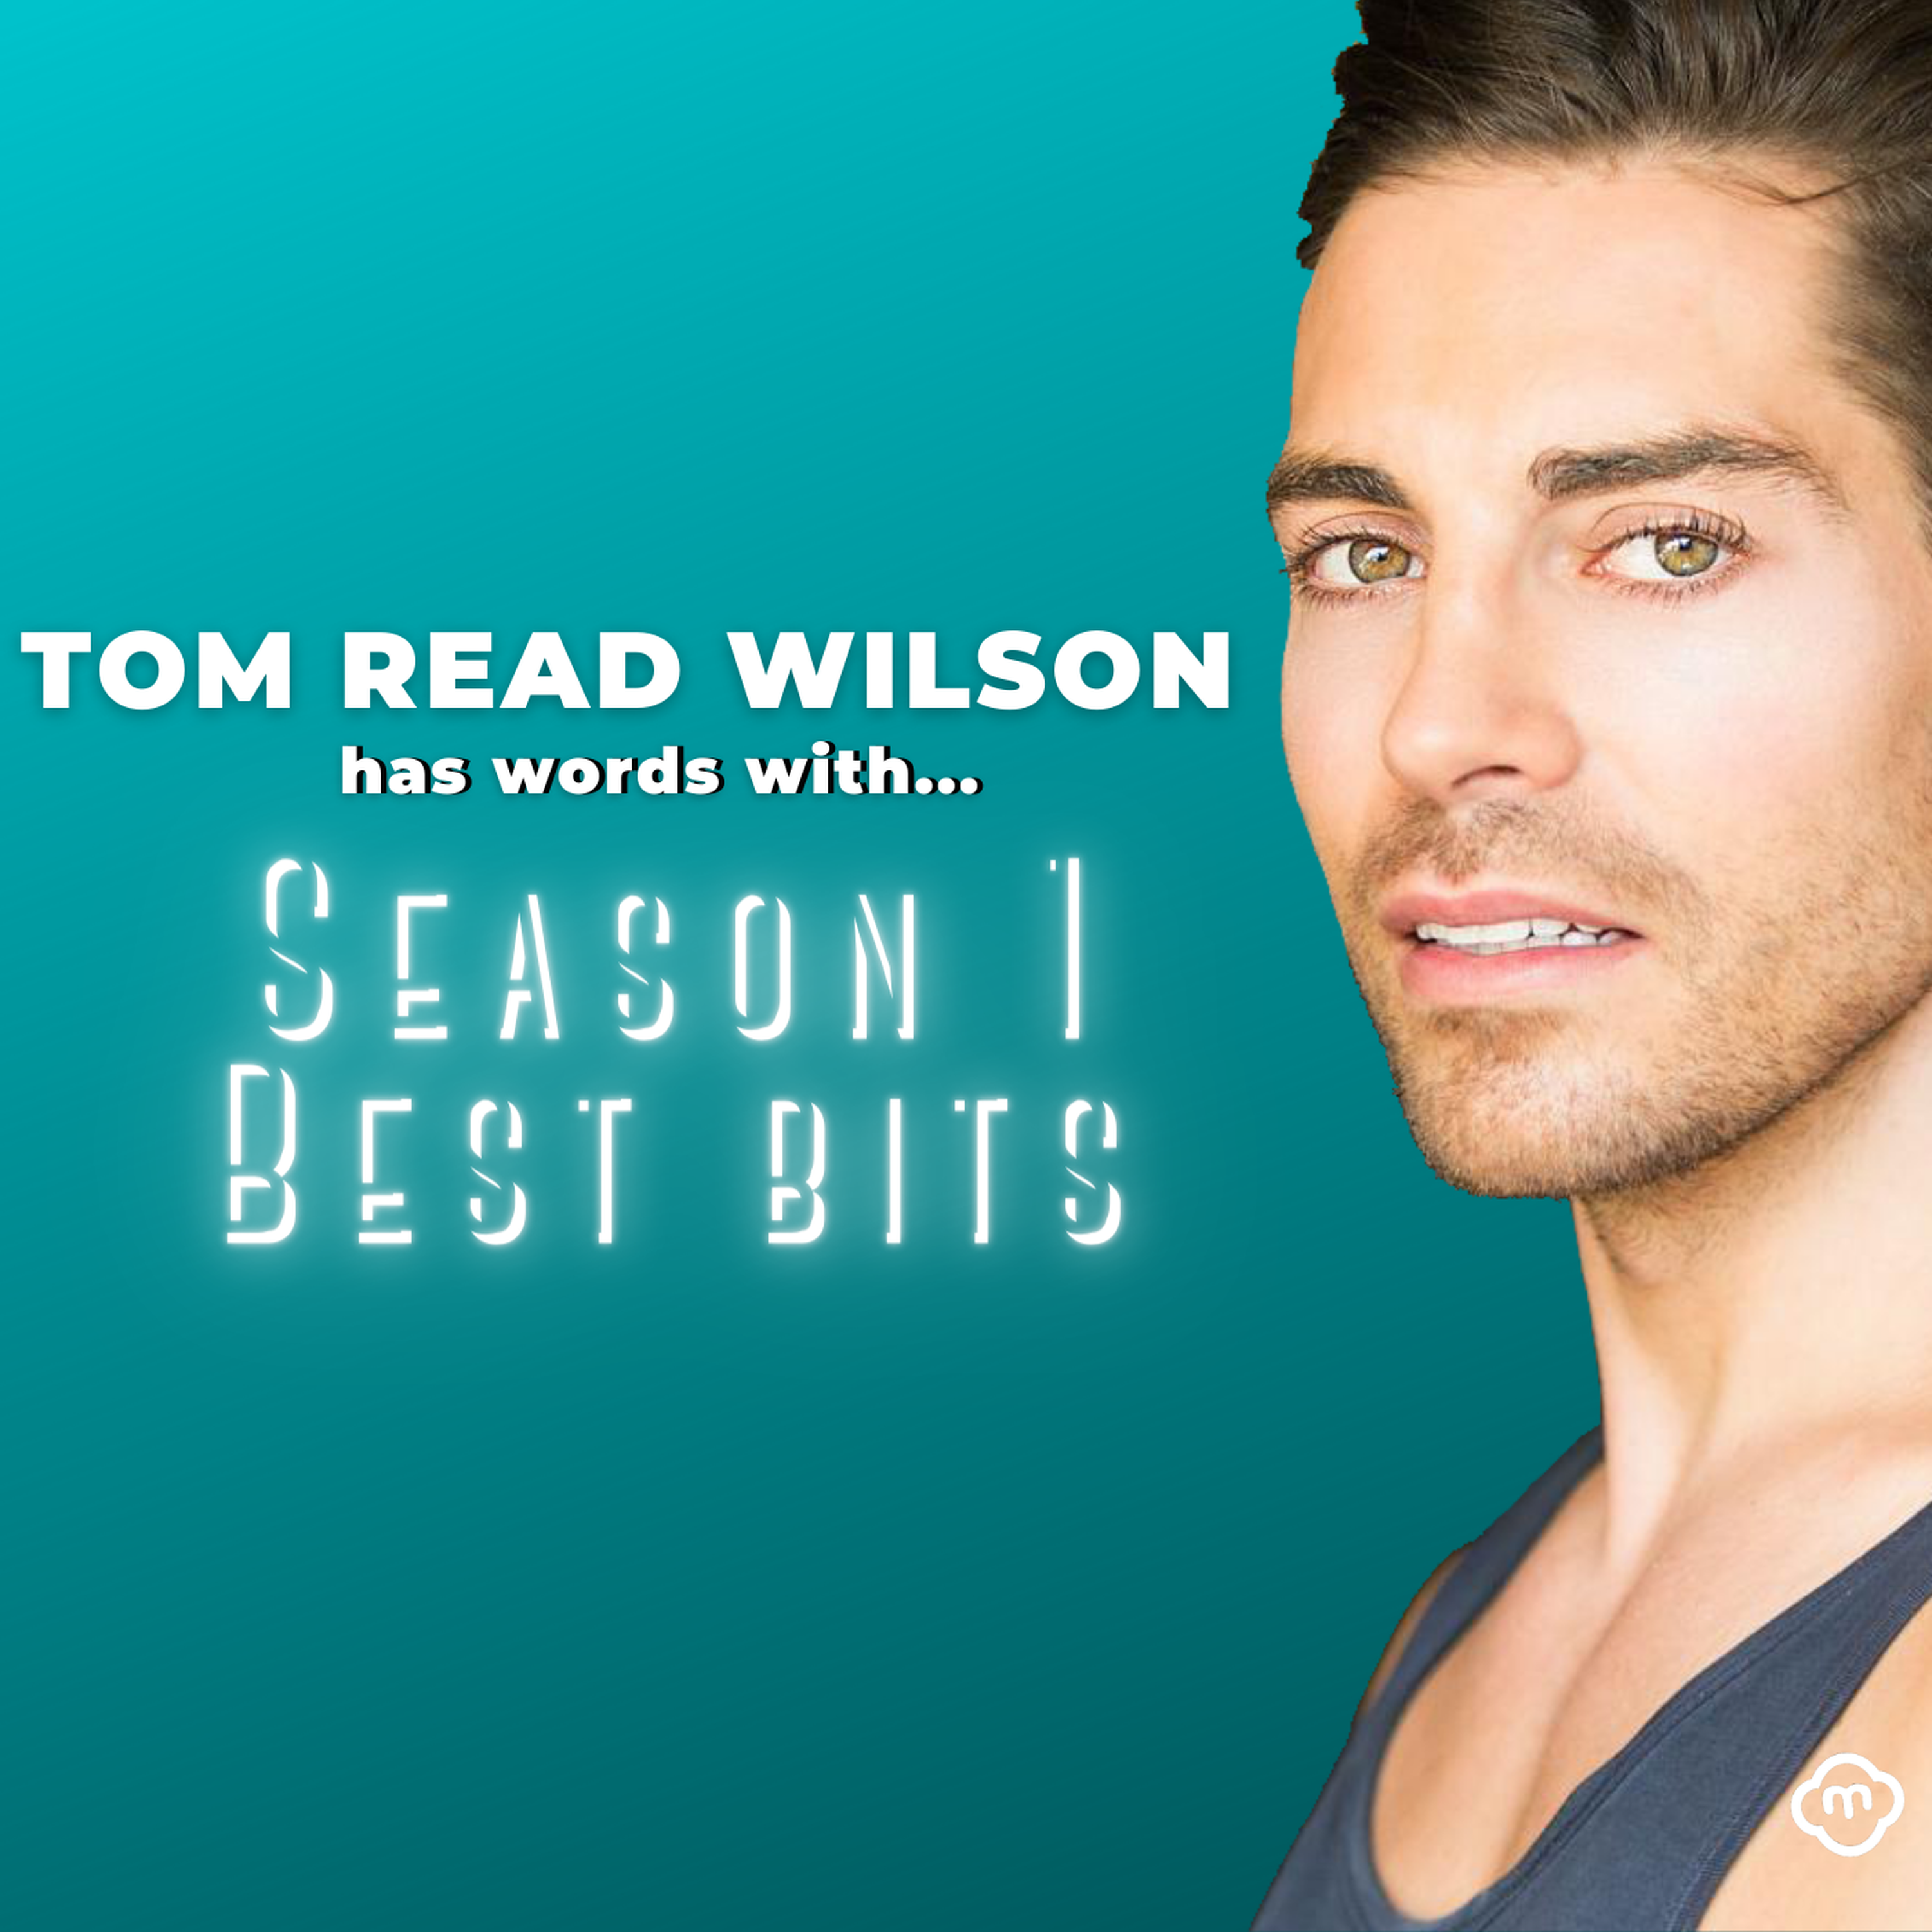 Tom Read Wilson has words with... Best Bits